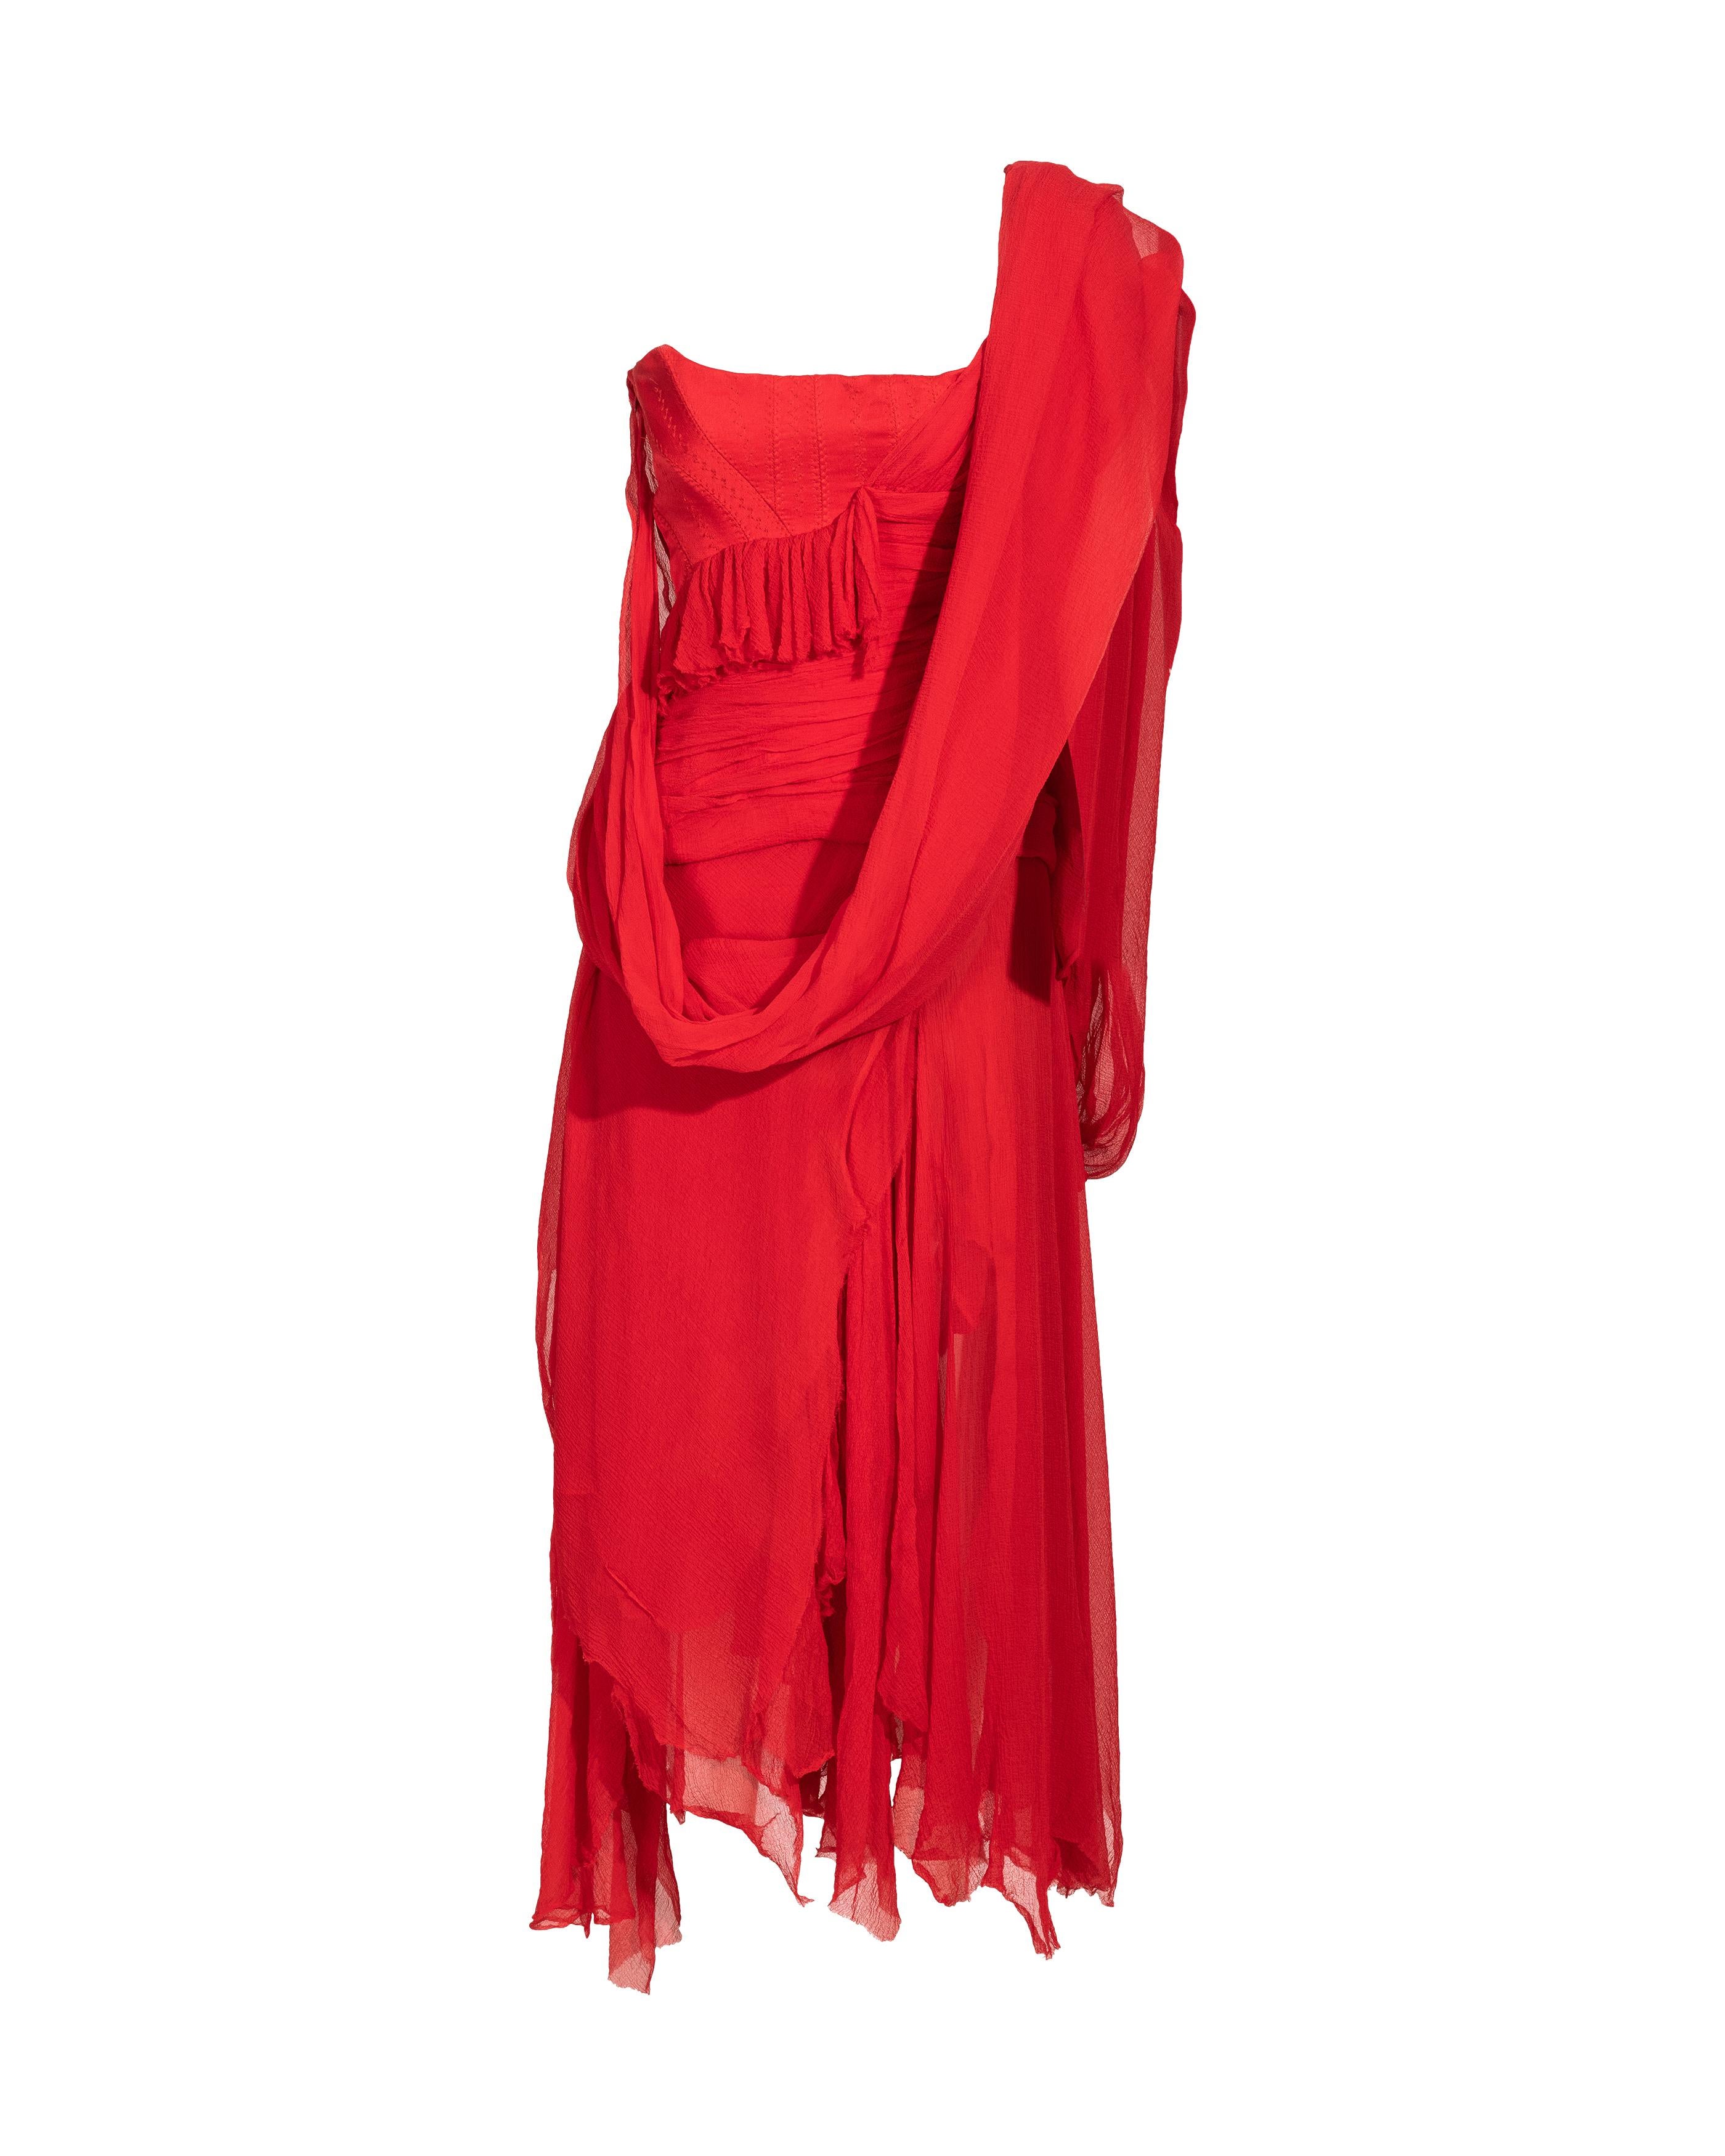 S/S 2003 Alexander McQueen  'Irere' Collection Red Silk Chiffon Gown with Sash For Sale 12